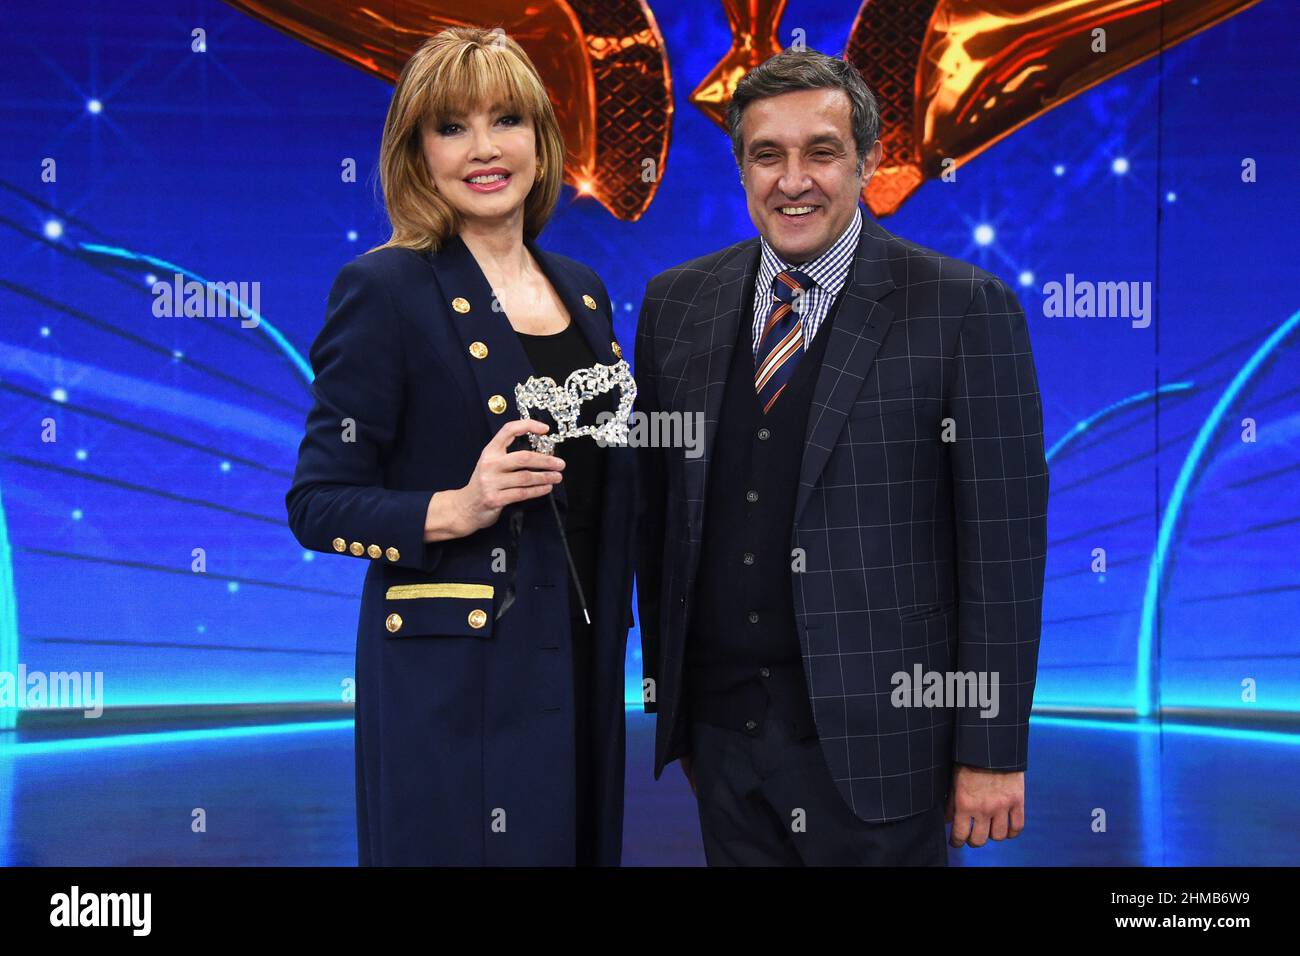 Rome, Italie. 08rd février 2022; TV Broadcast il cantte mascherato photocall, Milly Carlucci , Flavio Insinna crédit: massimo insabato/Alay Live News Banque D'Images